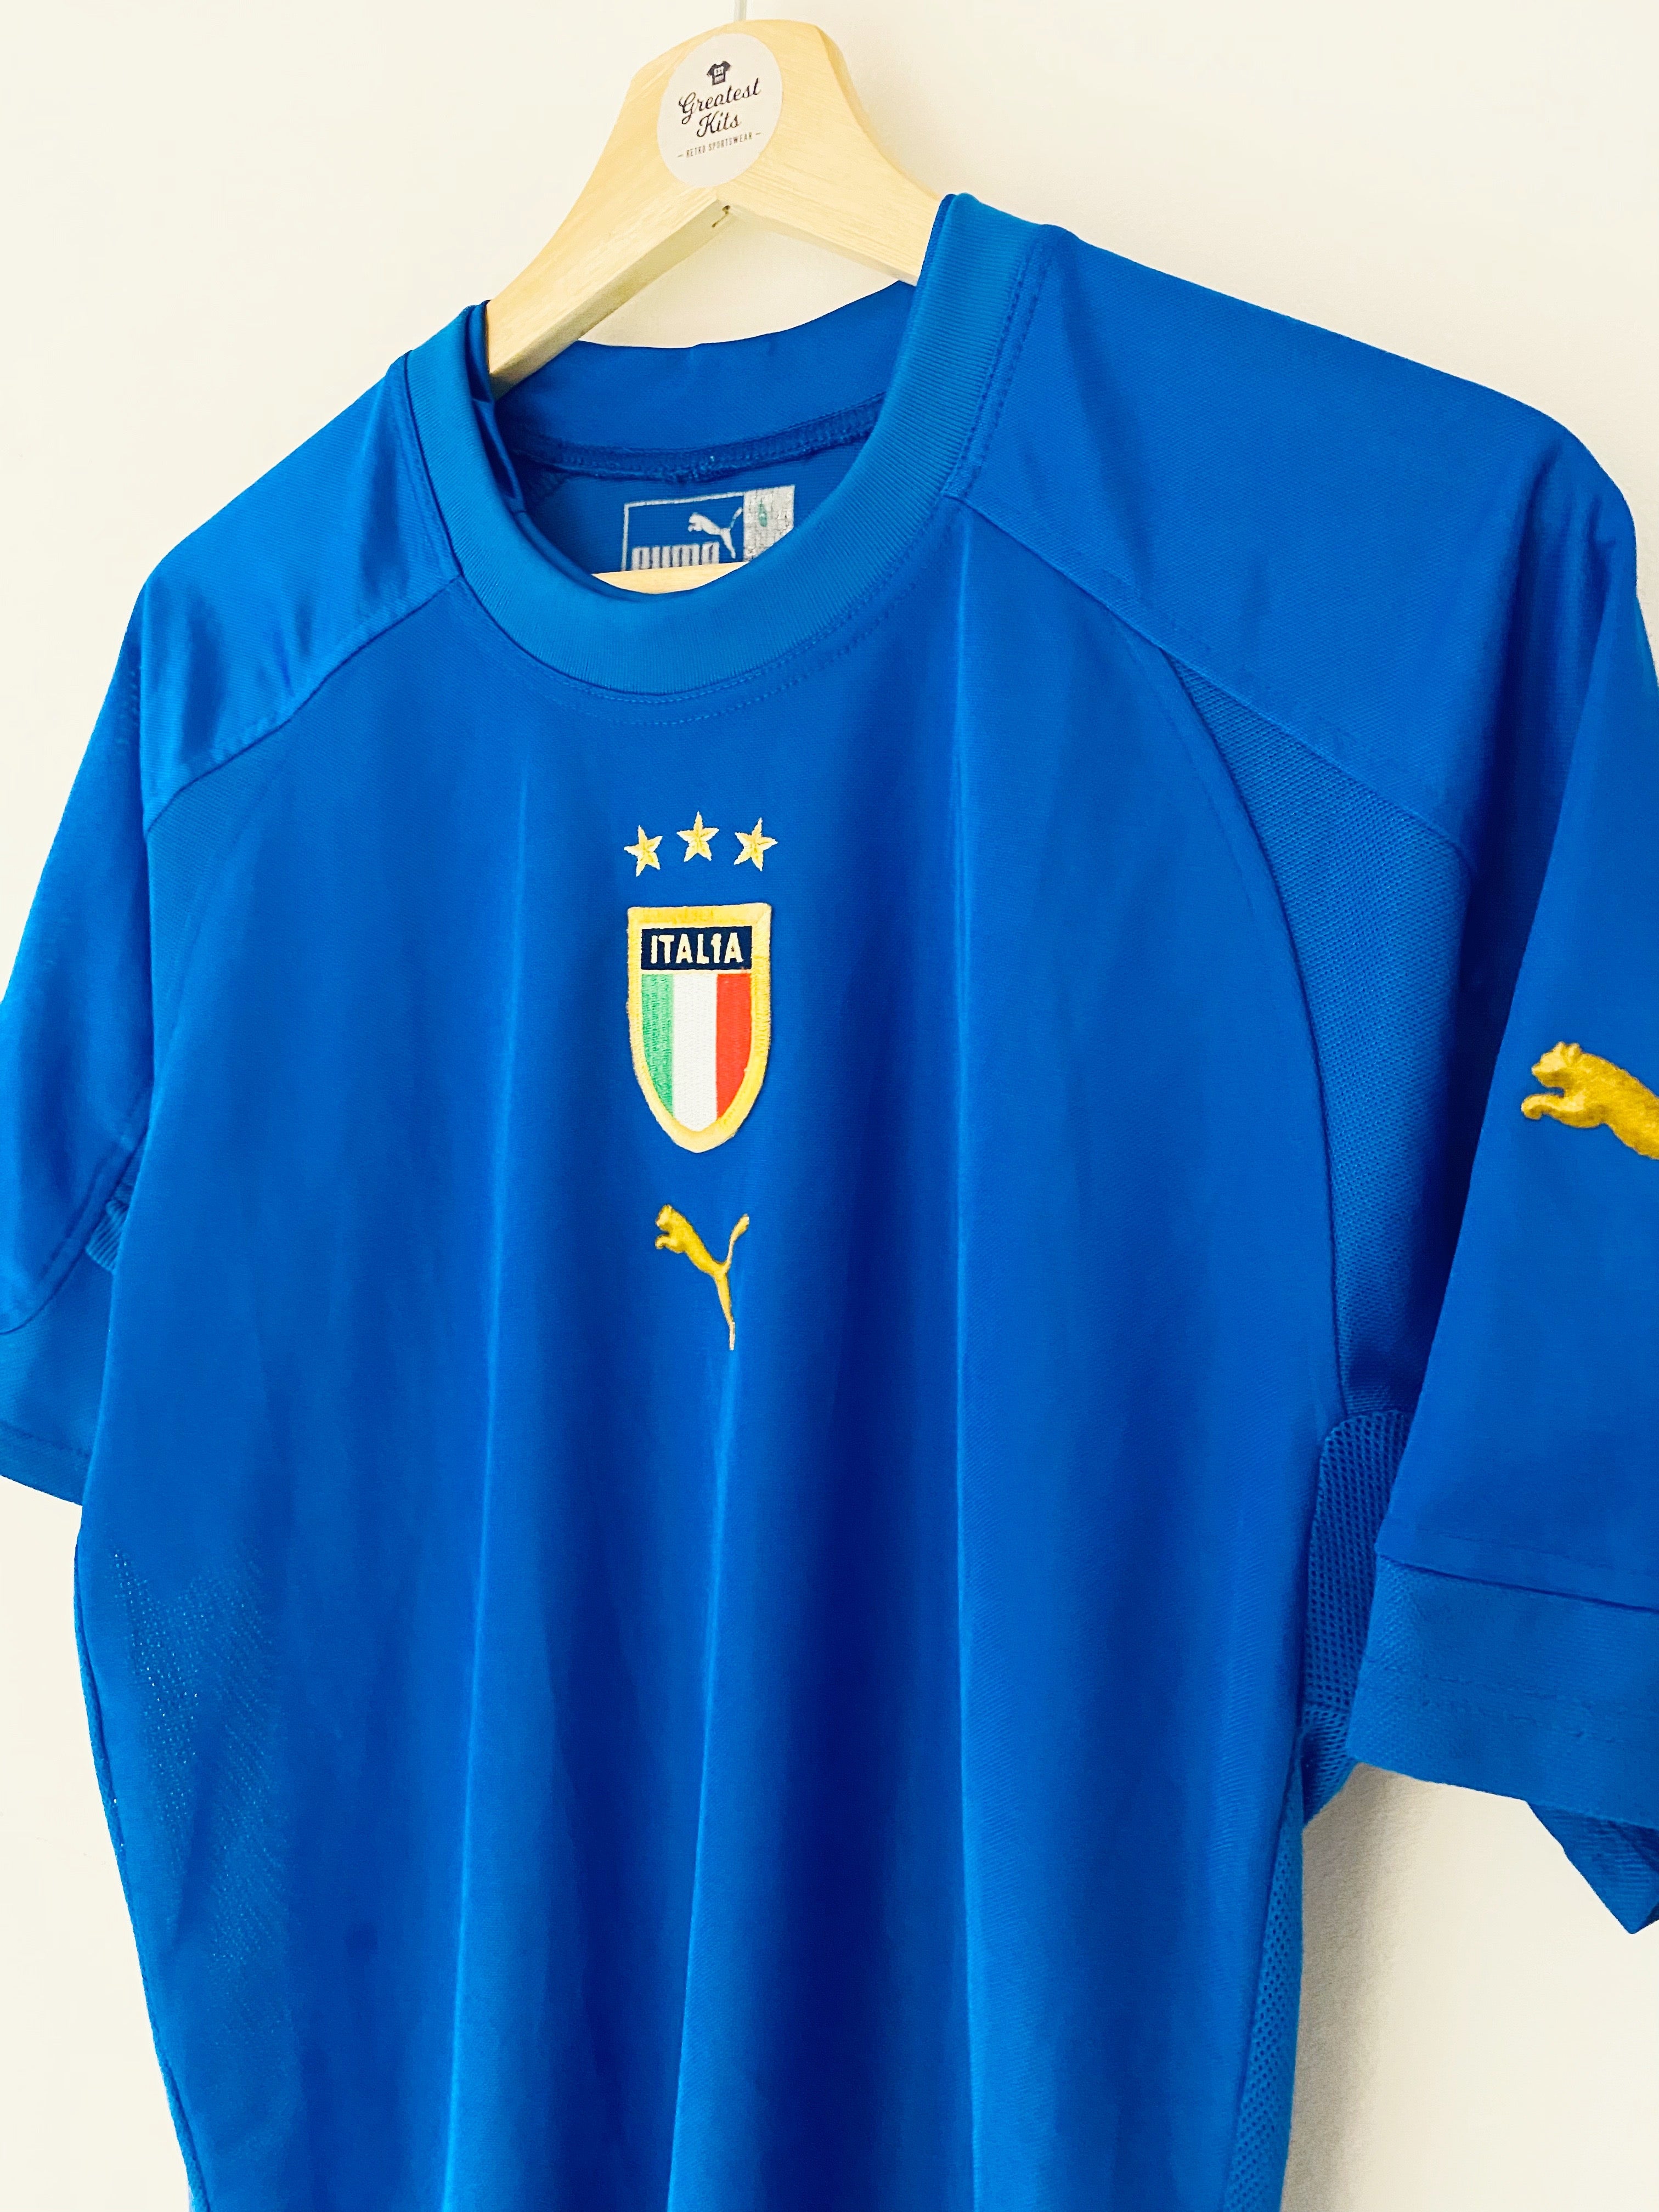 2004/06 Italy Home Shirt (S) 8.5/10